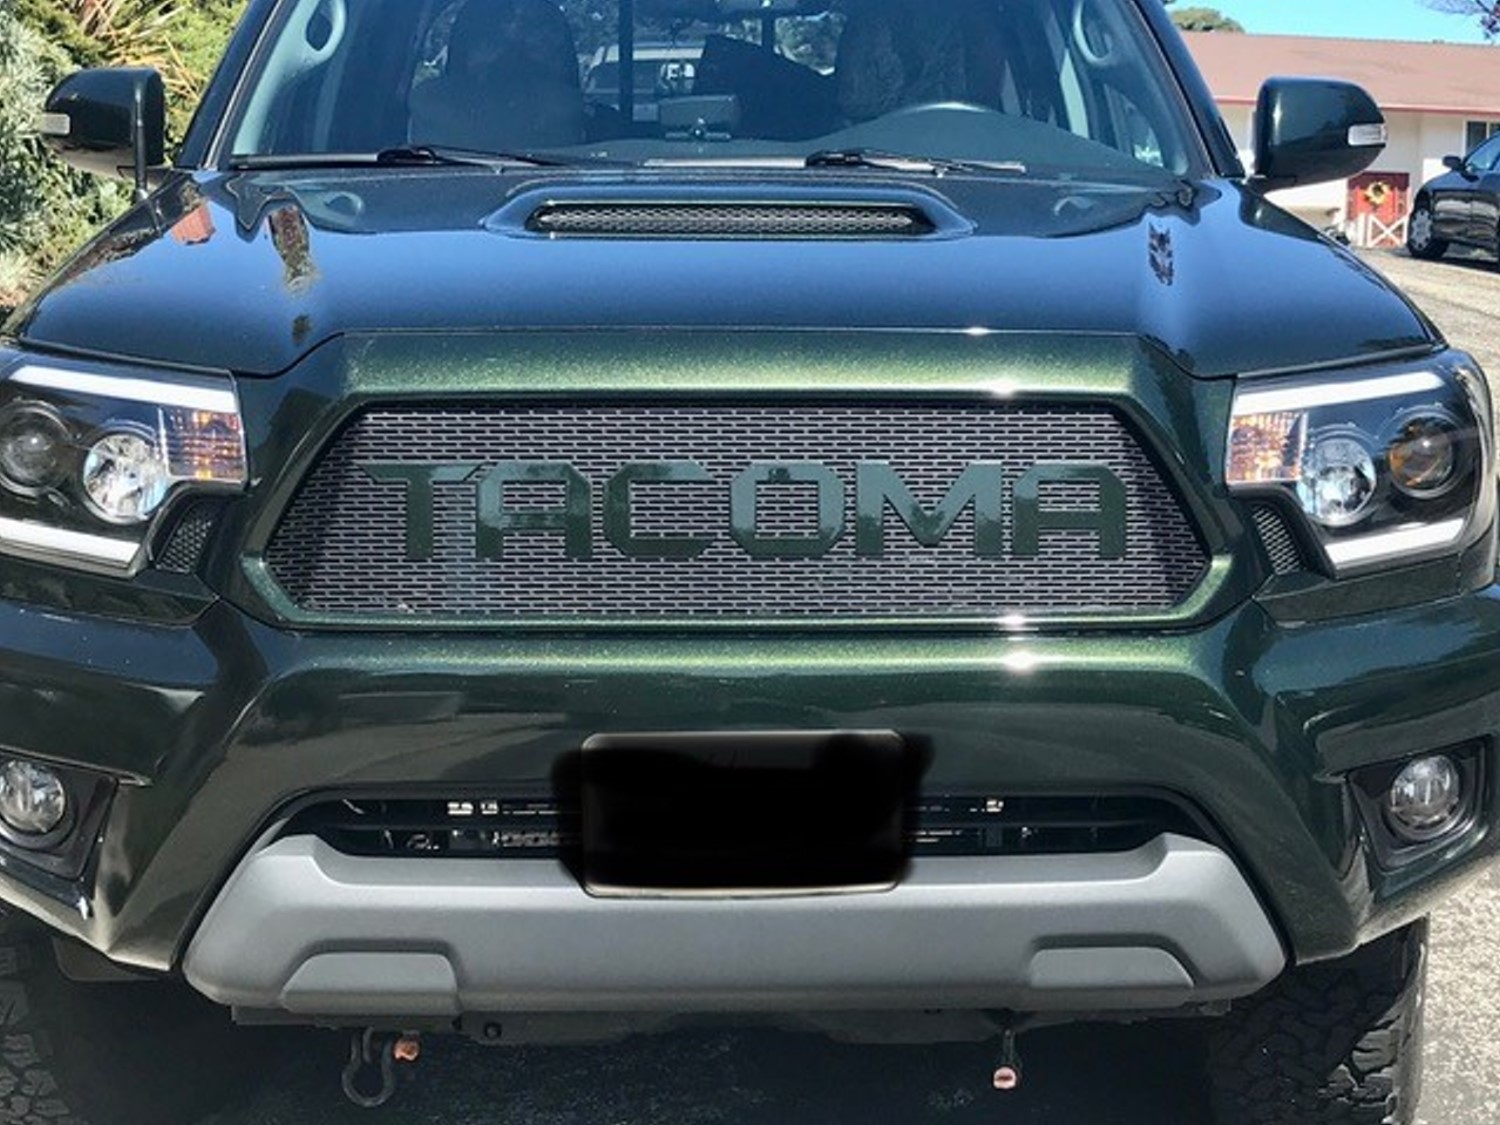 2012 - 2015 Toyota Tacoma Grill Mesh With Sharp Letters #5